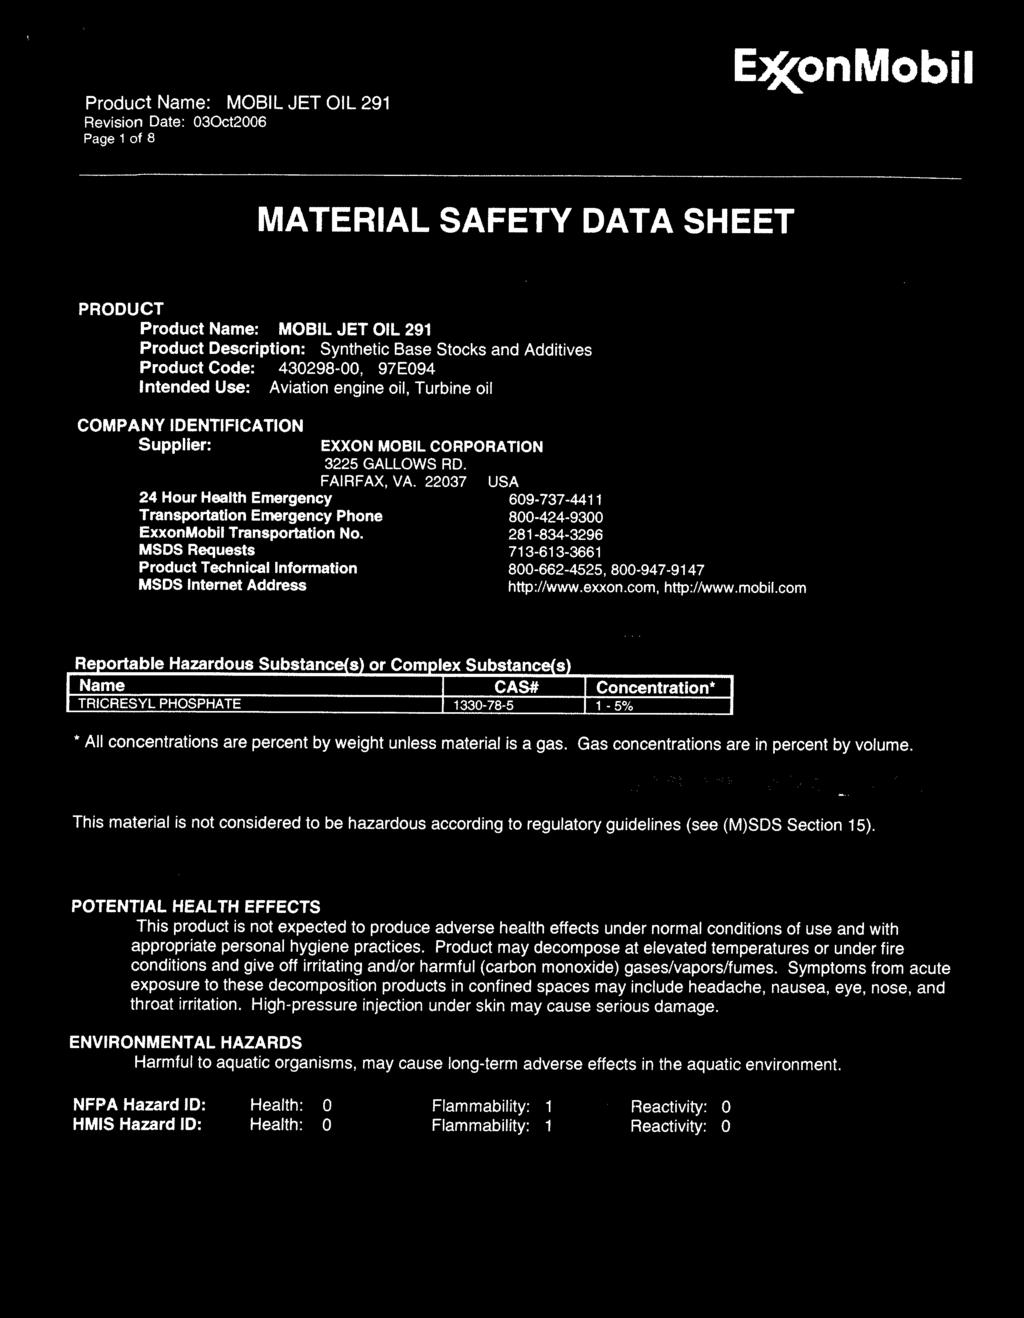 Page 1 of 8 E)f(onMobil MATERAL SAFETY DATA SHEET SECTON 1 PRODUCT AND COMPANY DENTFCATON PRODUCT Product Name: MOBL JET OL 291 Product Description: Synthetic Base Stocks and Additives Product Code: